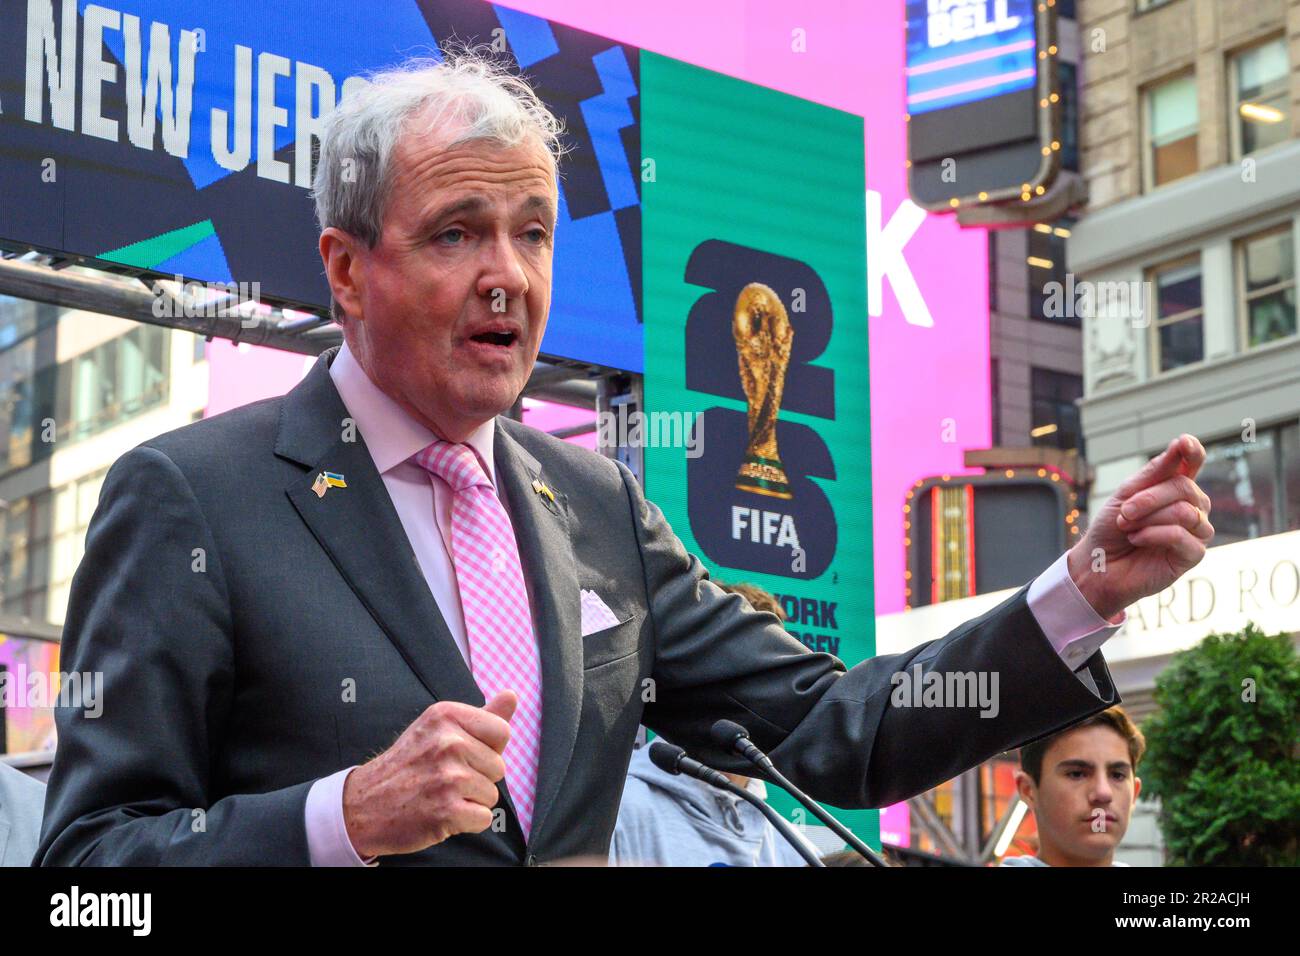 New York, USA. 18th May, 2023. New Jersey Governor Phil Murphy wears lapel pins with US and Ukrainian flags at a FIFA World Cup 2026 New York/New Jersey Launch Event in Times Square. The event unveiled the official themes for the MetLife stadium matches: 'We are NYNJ' and 'We are 26'. The world's top soccer competition is already planning to host 8 matches in the New York/New Jersey area and the local organizers want to host the final game here too. Credit: Enrique Shore/Alamy Live News Stock Photo